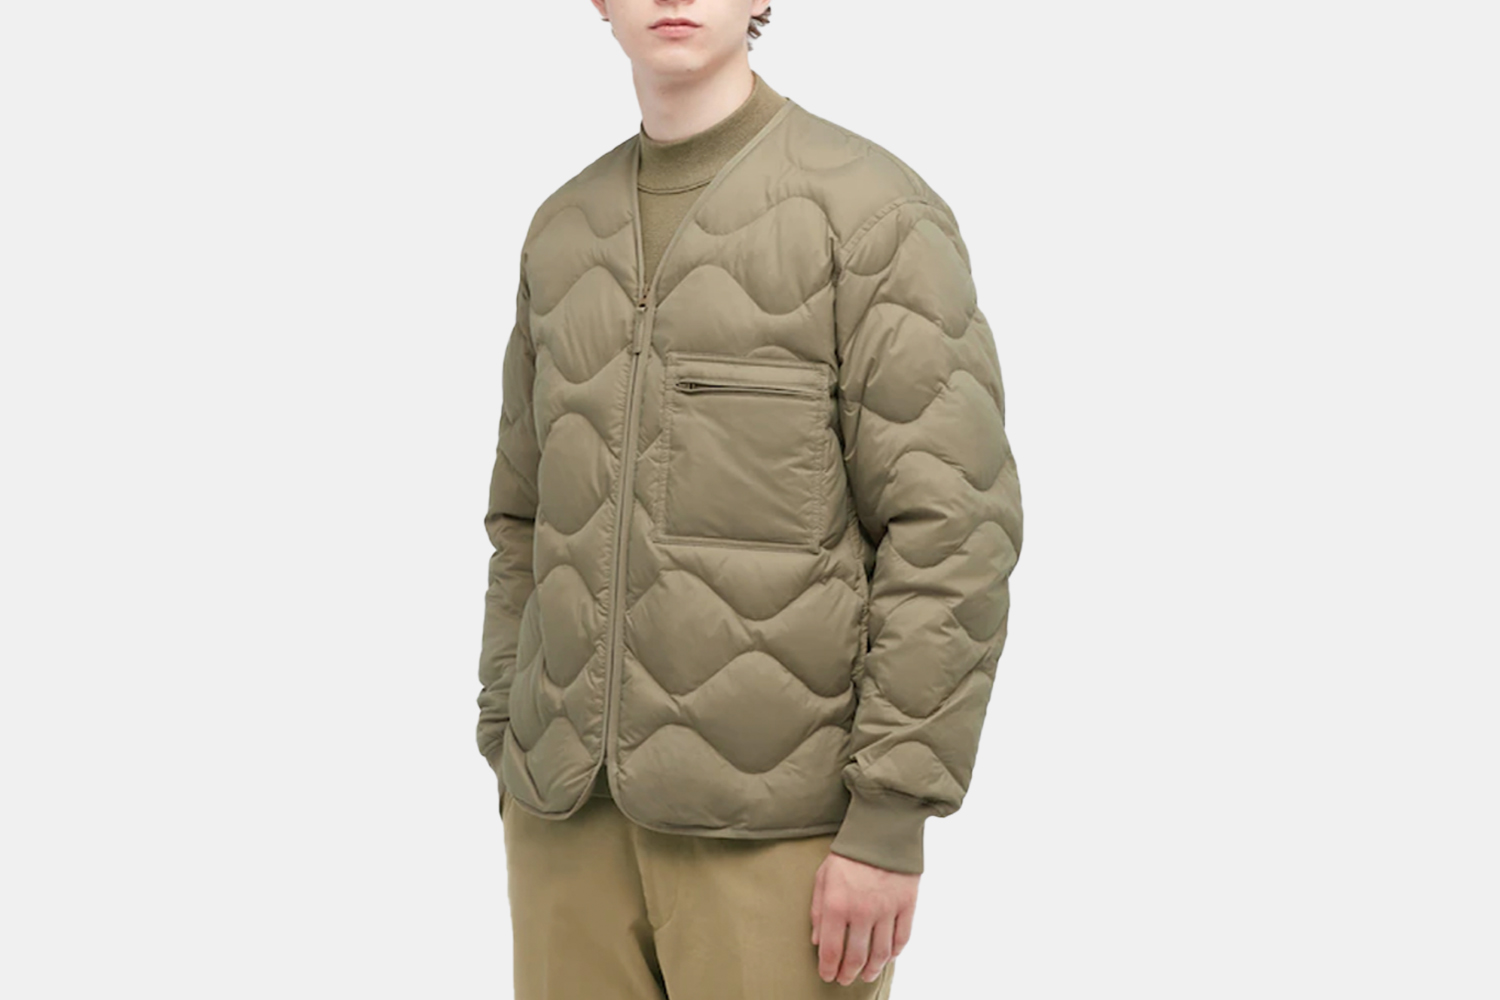 A model in a quilted puffer jacket